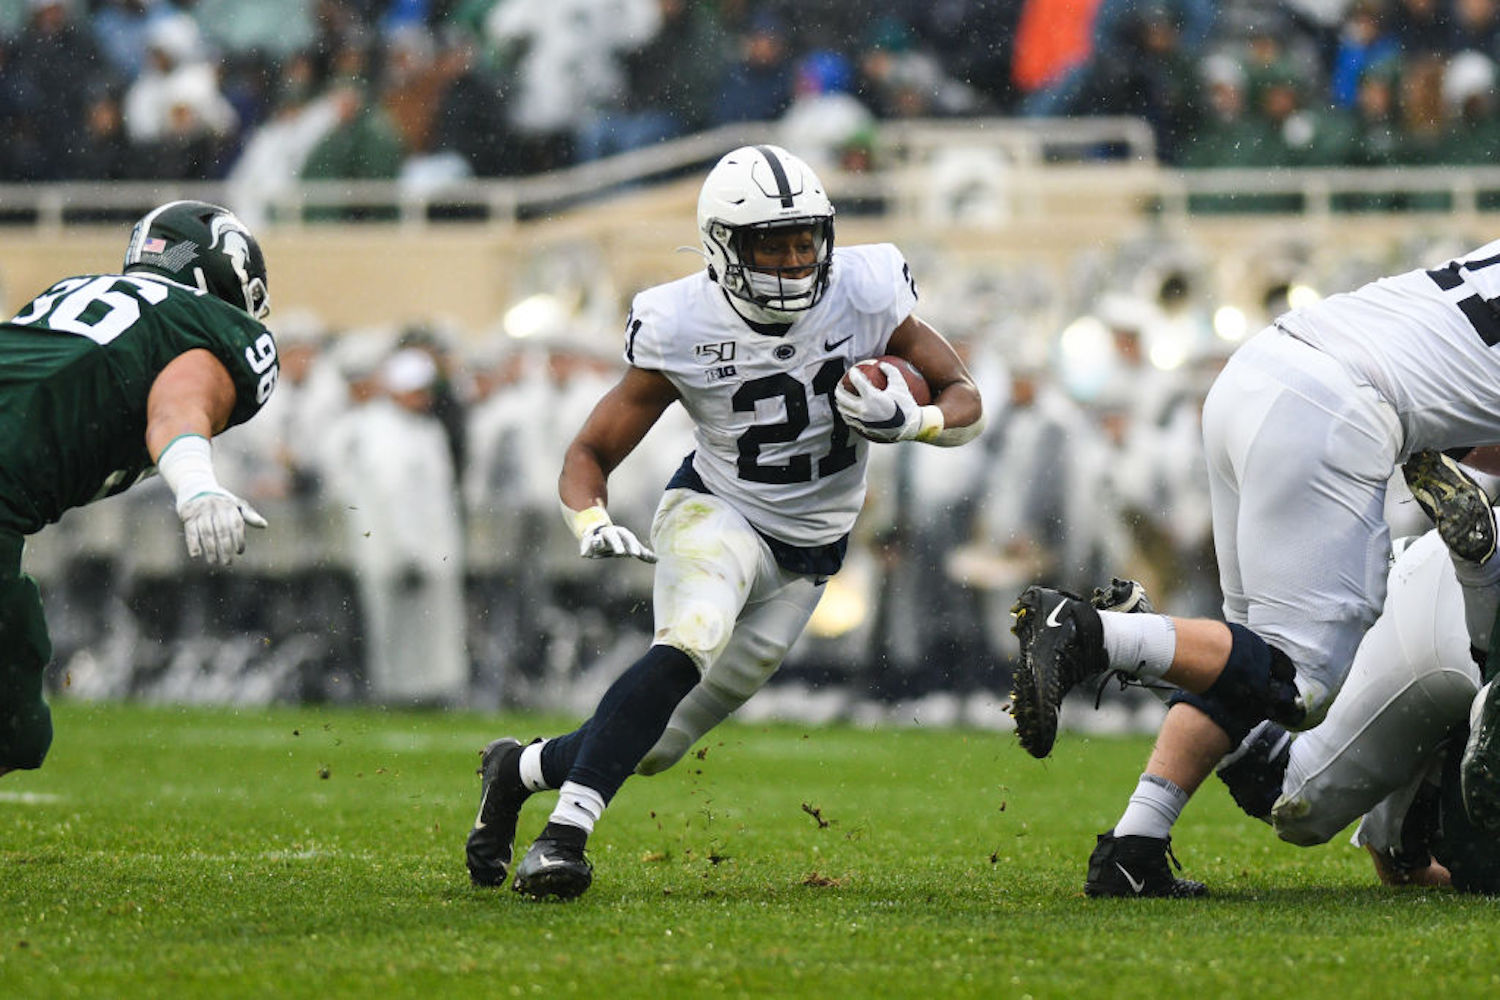 Penn State lost their starting running back Journey Brown before the season, and they just lost his replacement after just one game.